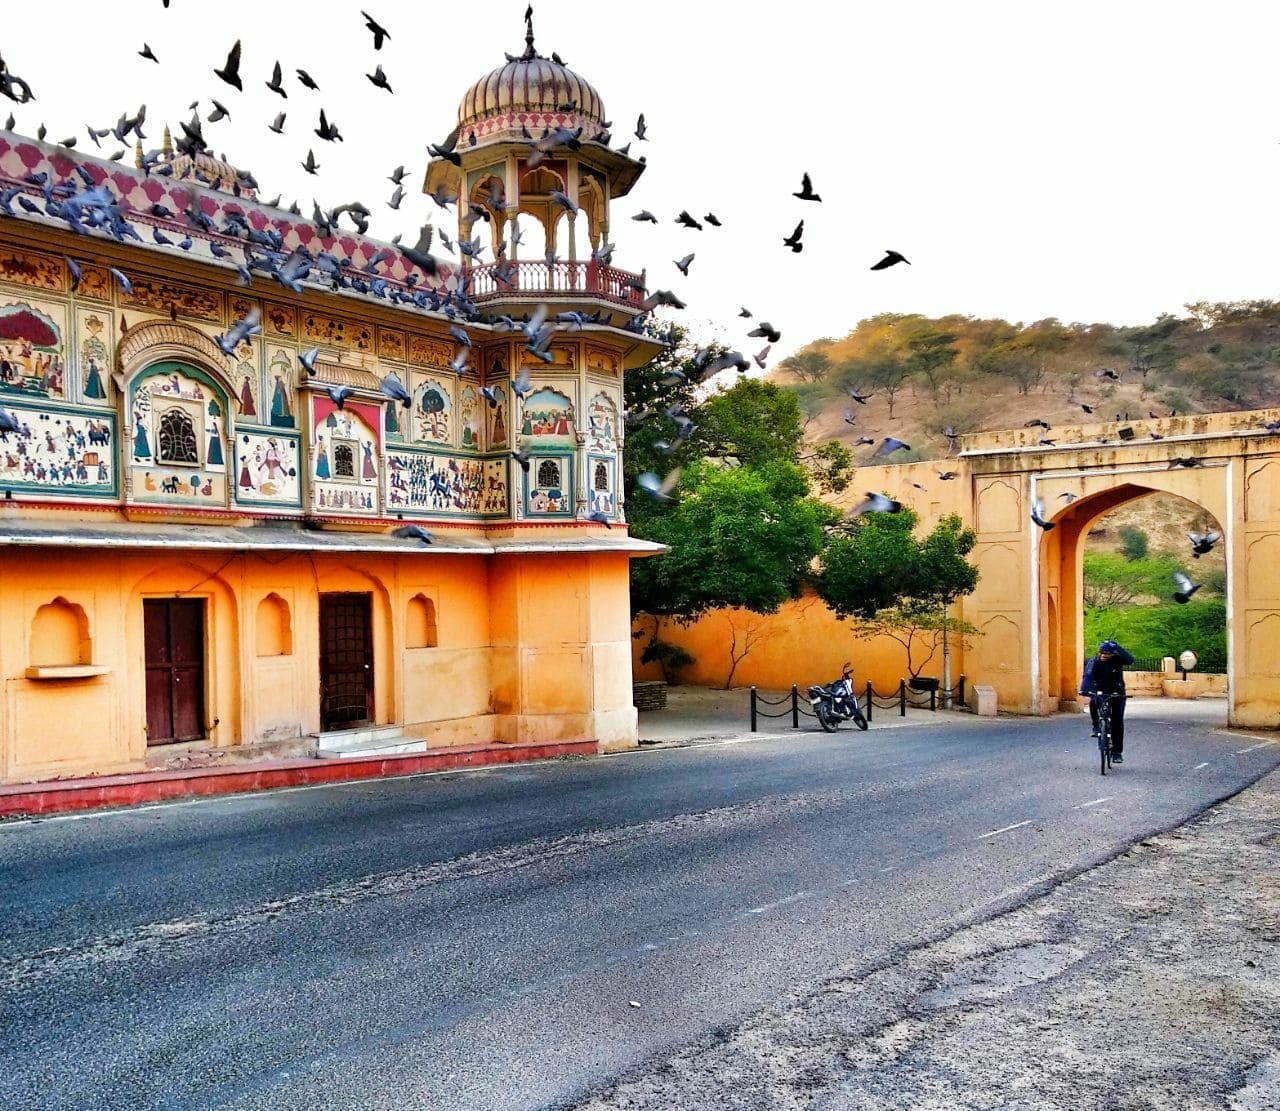 Cycle tour to the Nahargarh Fort in Jaipur